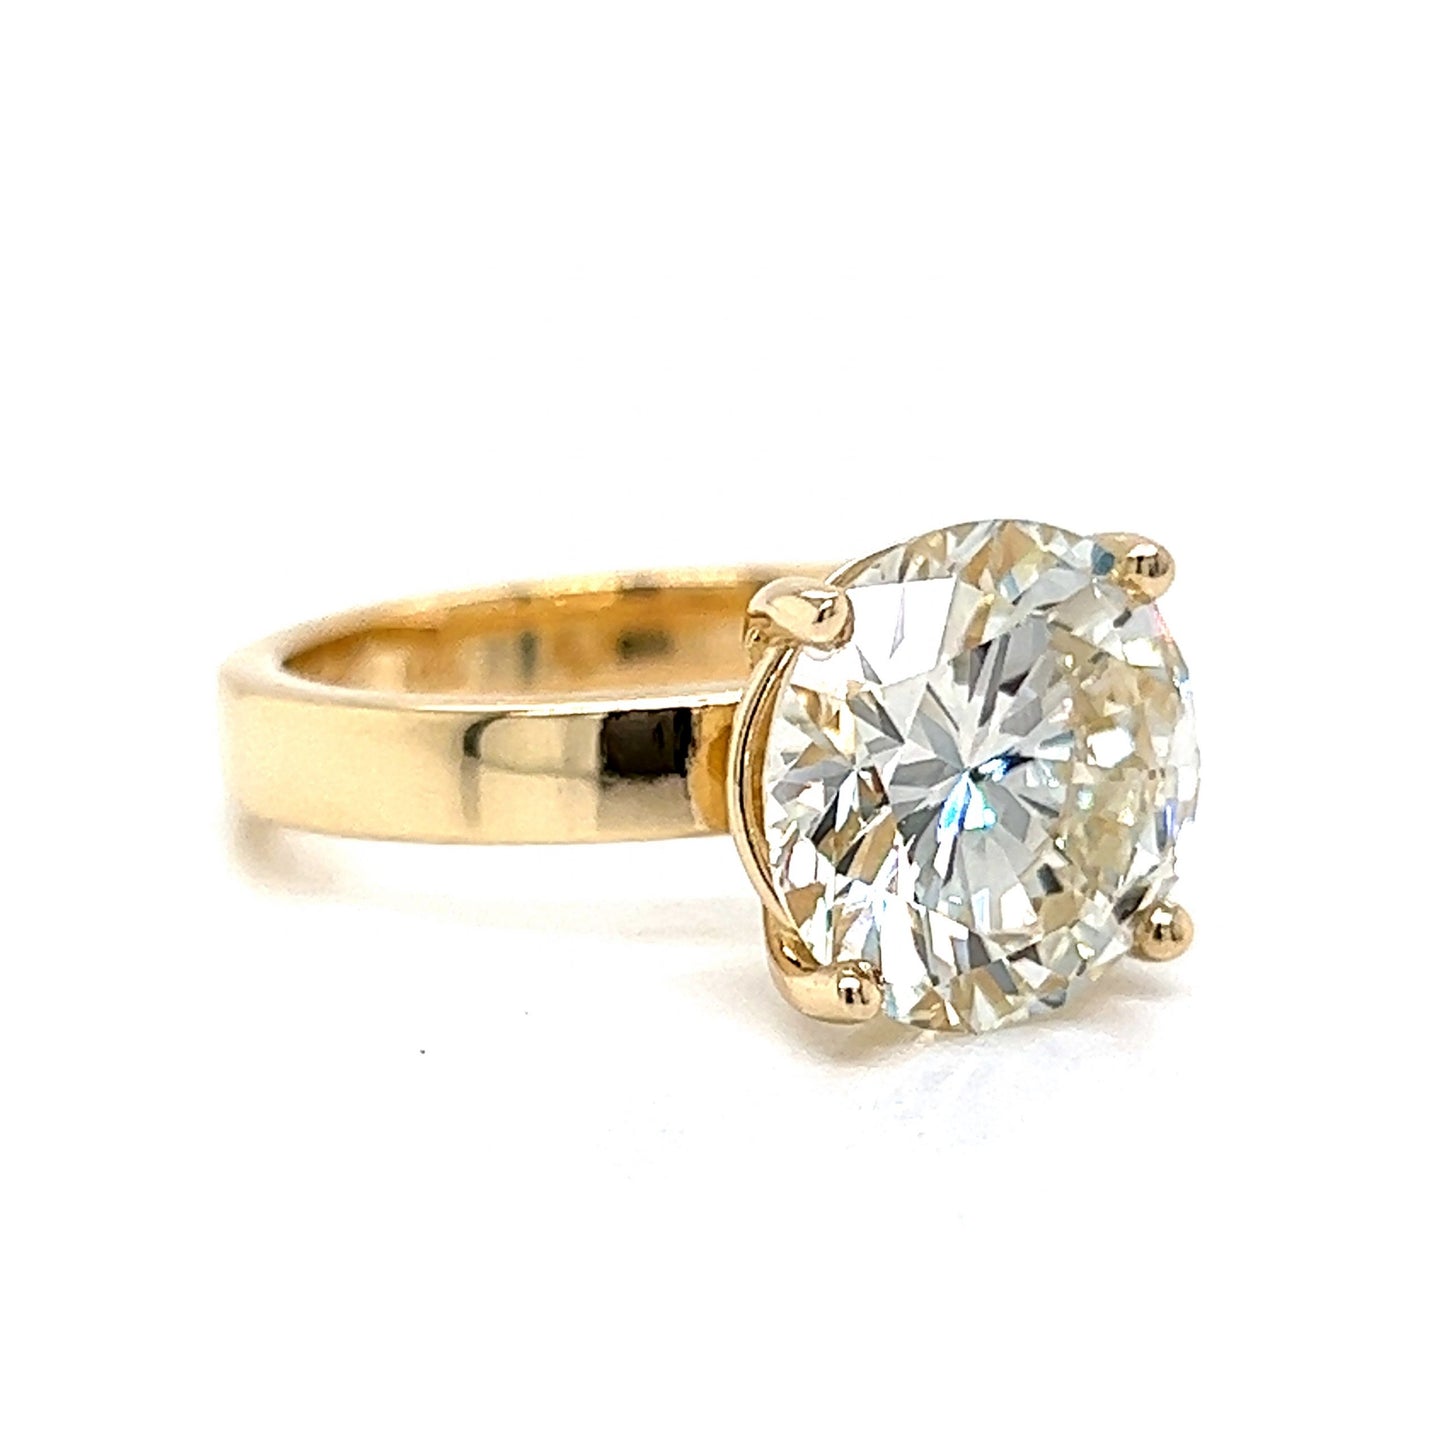 5 Carat Solitaire Diamond Engagement Ring in 14k Yellow Gold